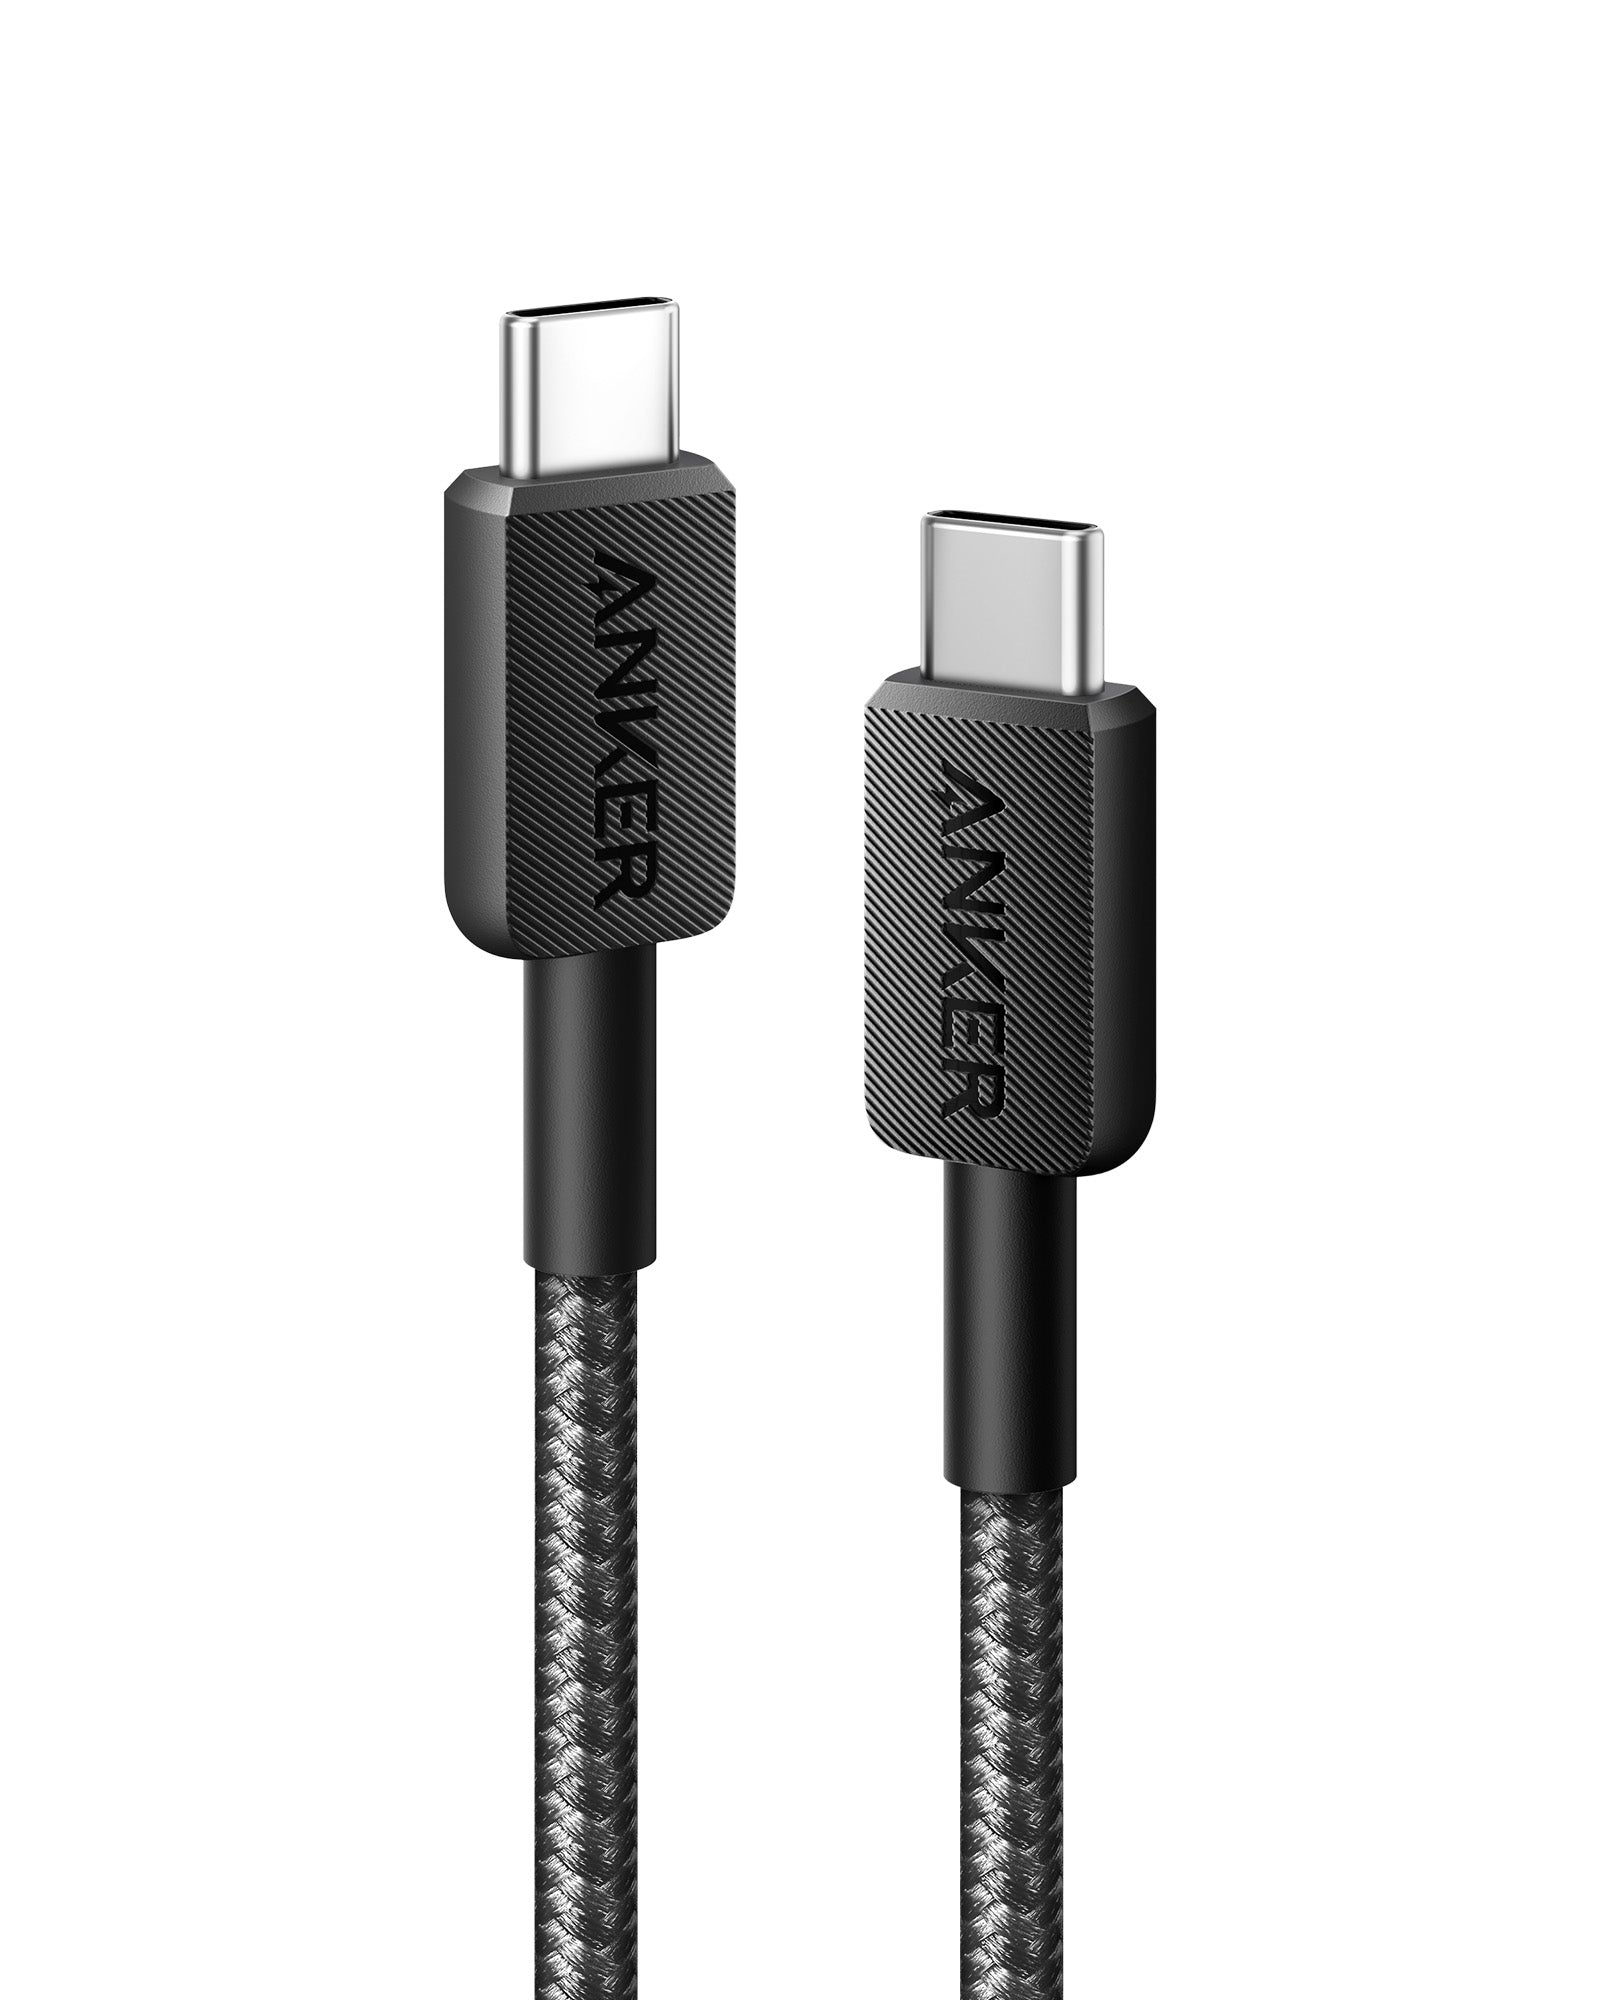 Anker 322 USB-C to USB-C Cable - Anker AU